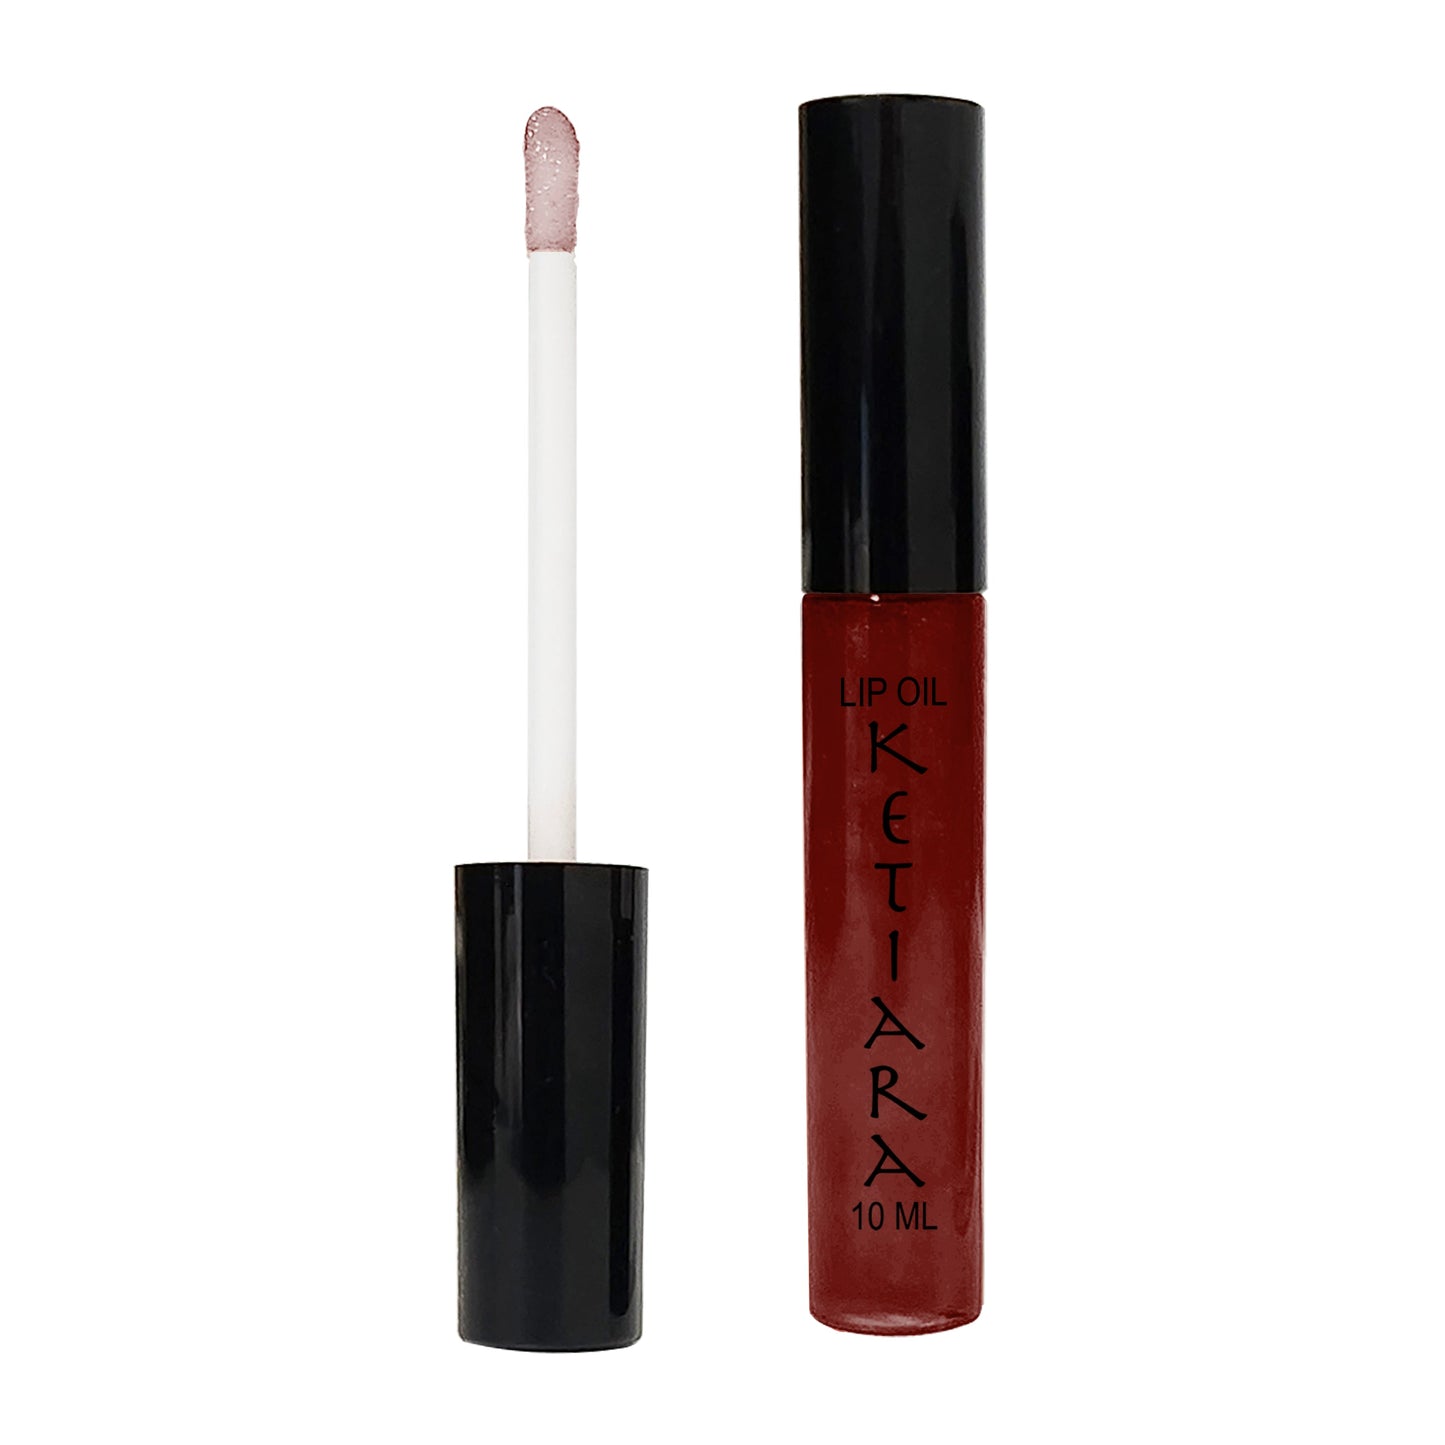 Blood Red Hydrating And Conditioning Non-sticky Premium Sheer Lip Oil Infused With Hyaluronic Acid